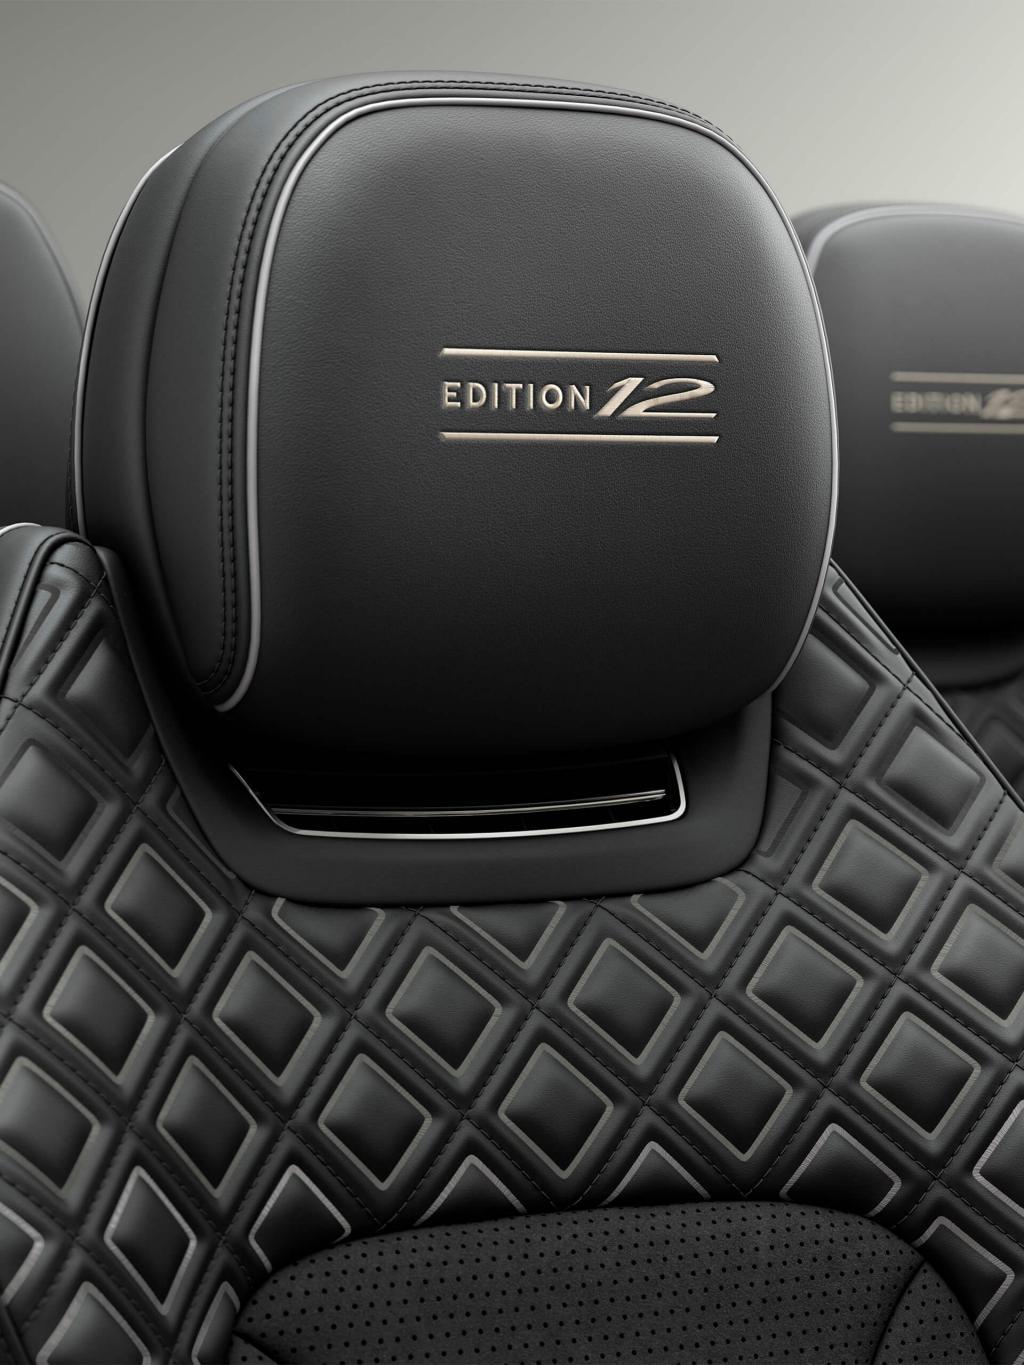 Bentley Continental GTC Speed Edition 12 seat in Beluga Hide with Edition 12 Emblems in Contrast stitching featuring Precision Diamond Quilt.